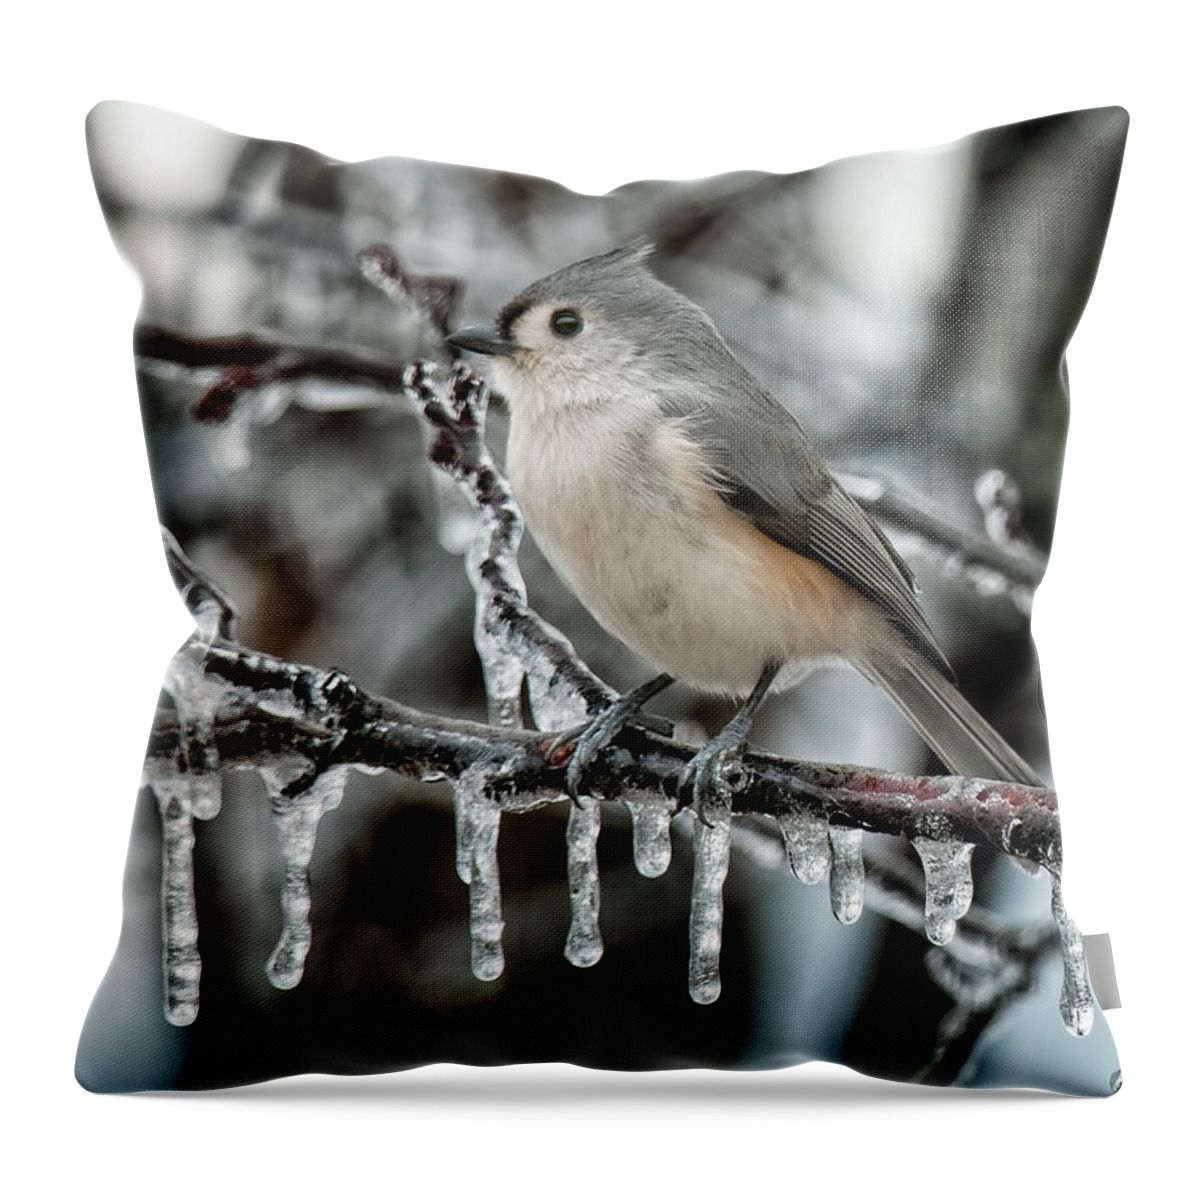 Tufted Titmouse Throw Pillow featuring the photograph Winter Titmouse by Lara Ellis